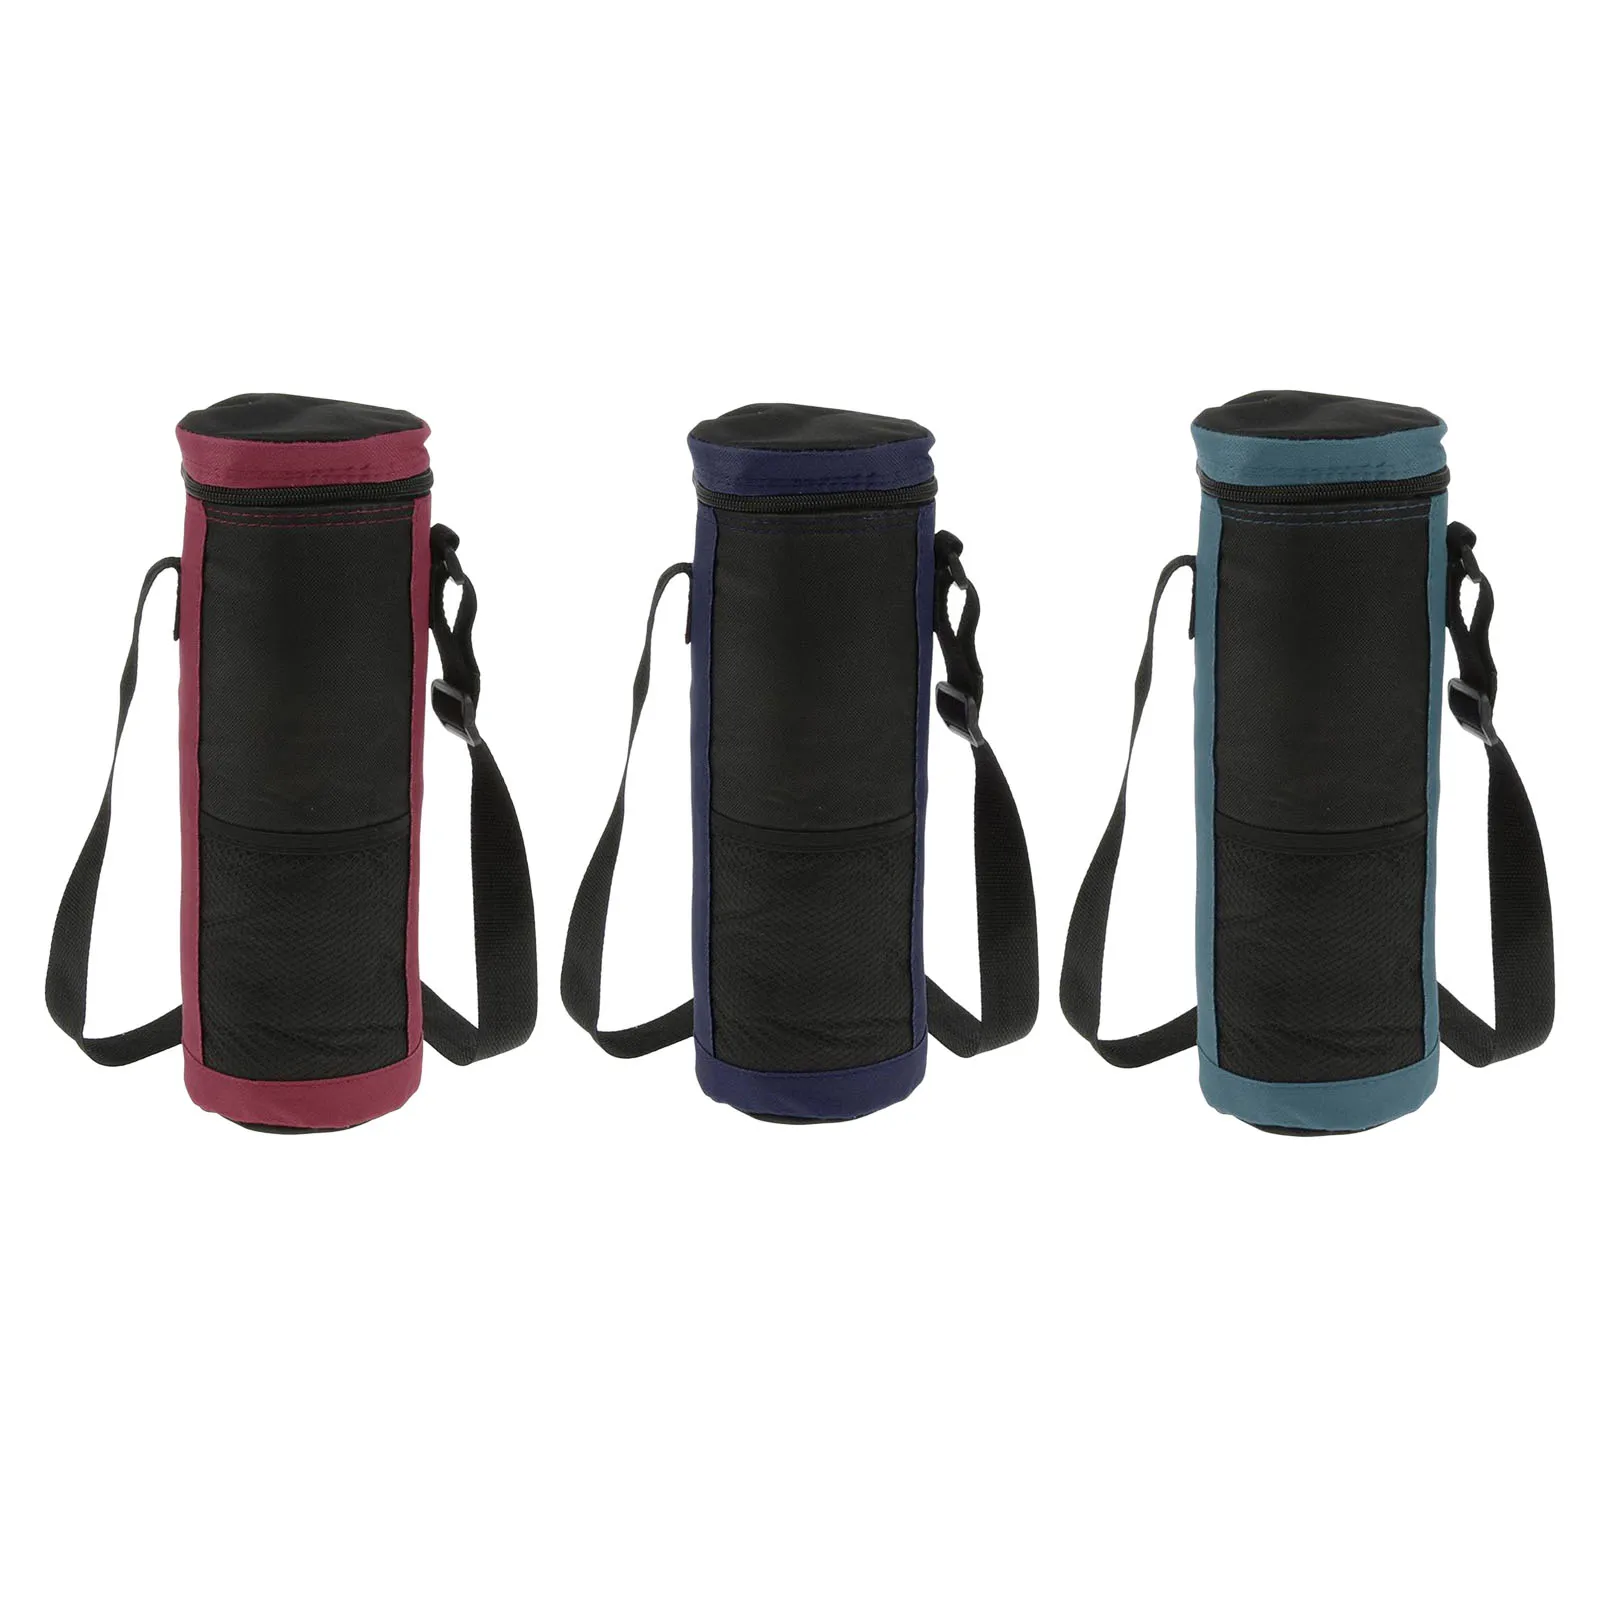 Outdoor Wine Cooler Bag Small Foldable Drinks Cooler Bags Insulated Beer Cooler Holds for Camping Picnic Traveling